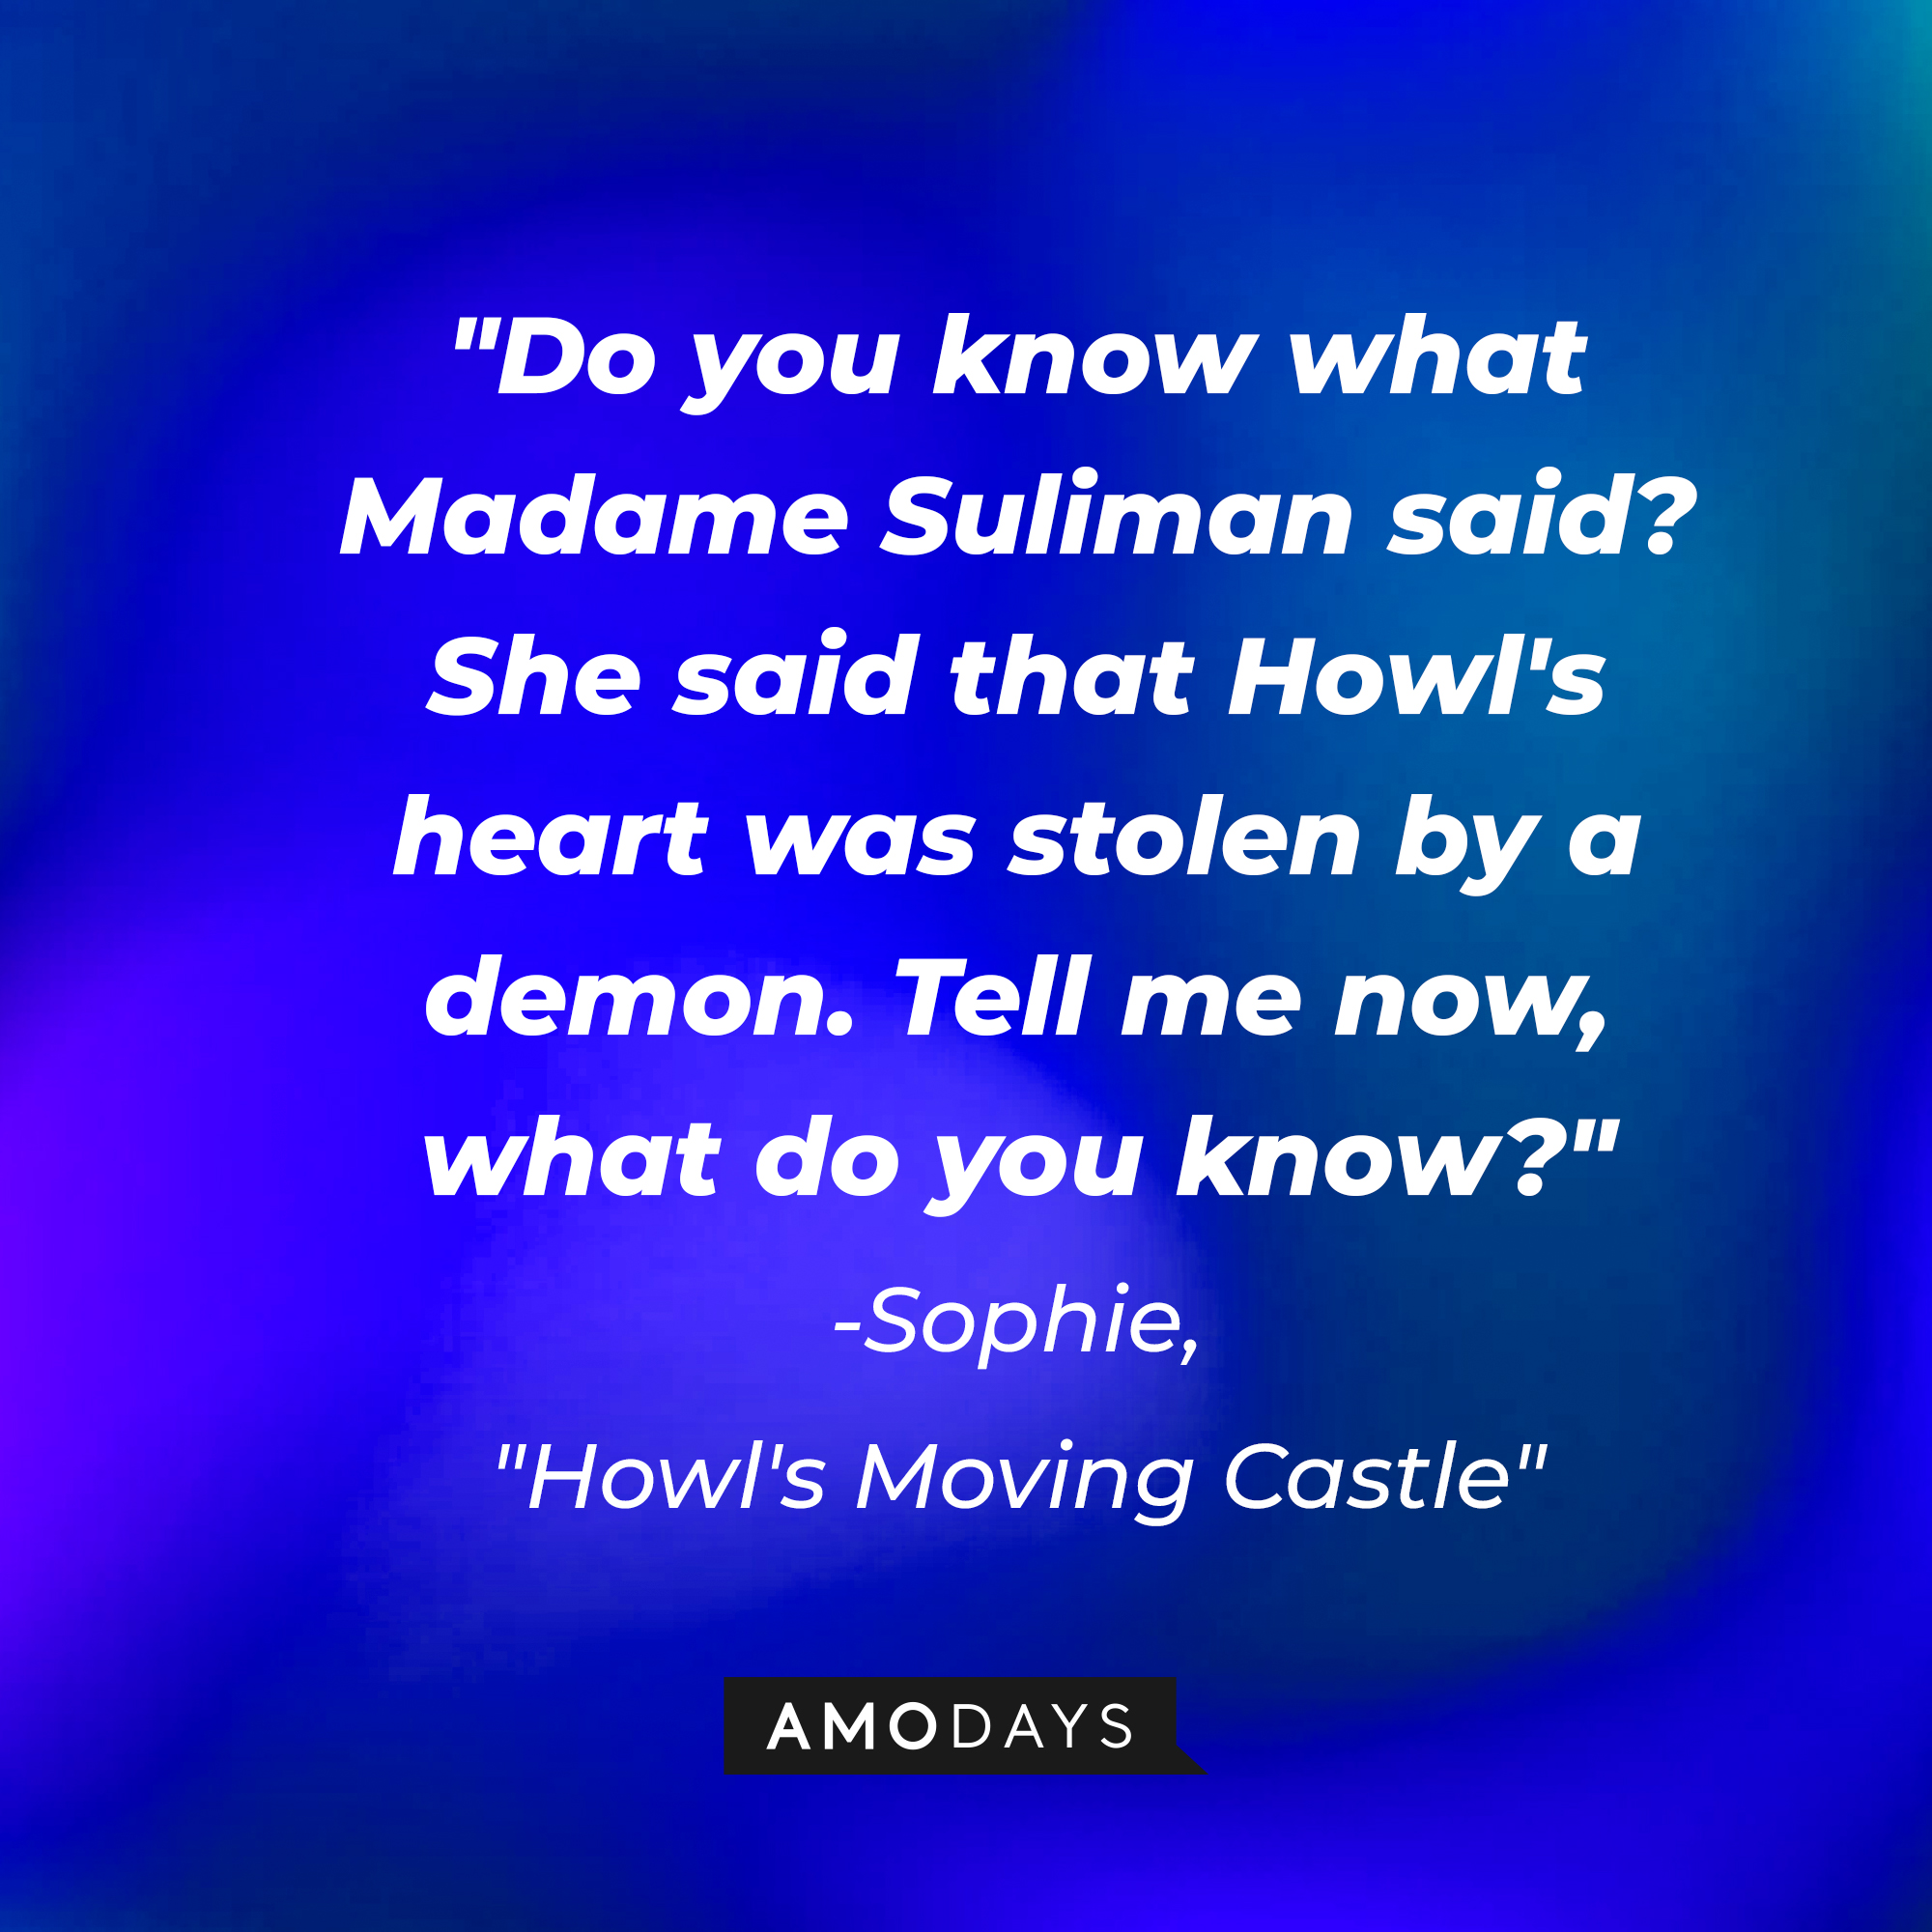 Sophie's quote in "Howl's Moving Castle:" "Do you know what Madame Suliman said? She said that Howl's heart was stolen by a demon. Tell me now, what do you know?"  | Source: AmoDays